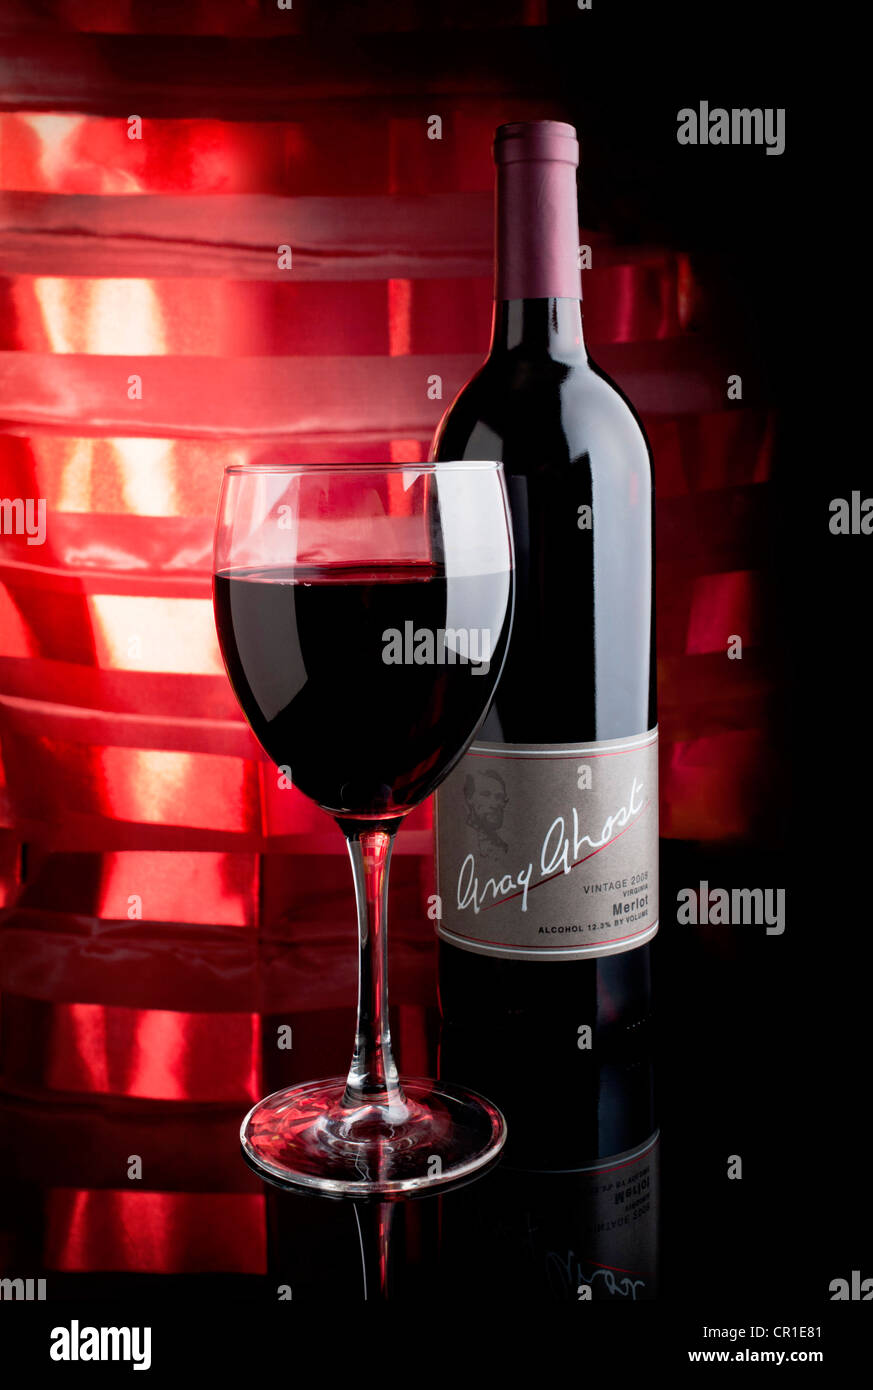 A bottle of Gray Ghost Merlot wine with glass and colorful background Stock Photo